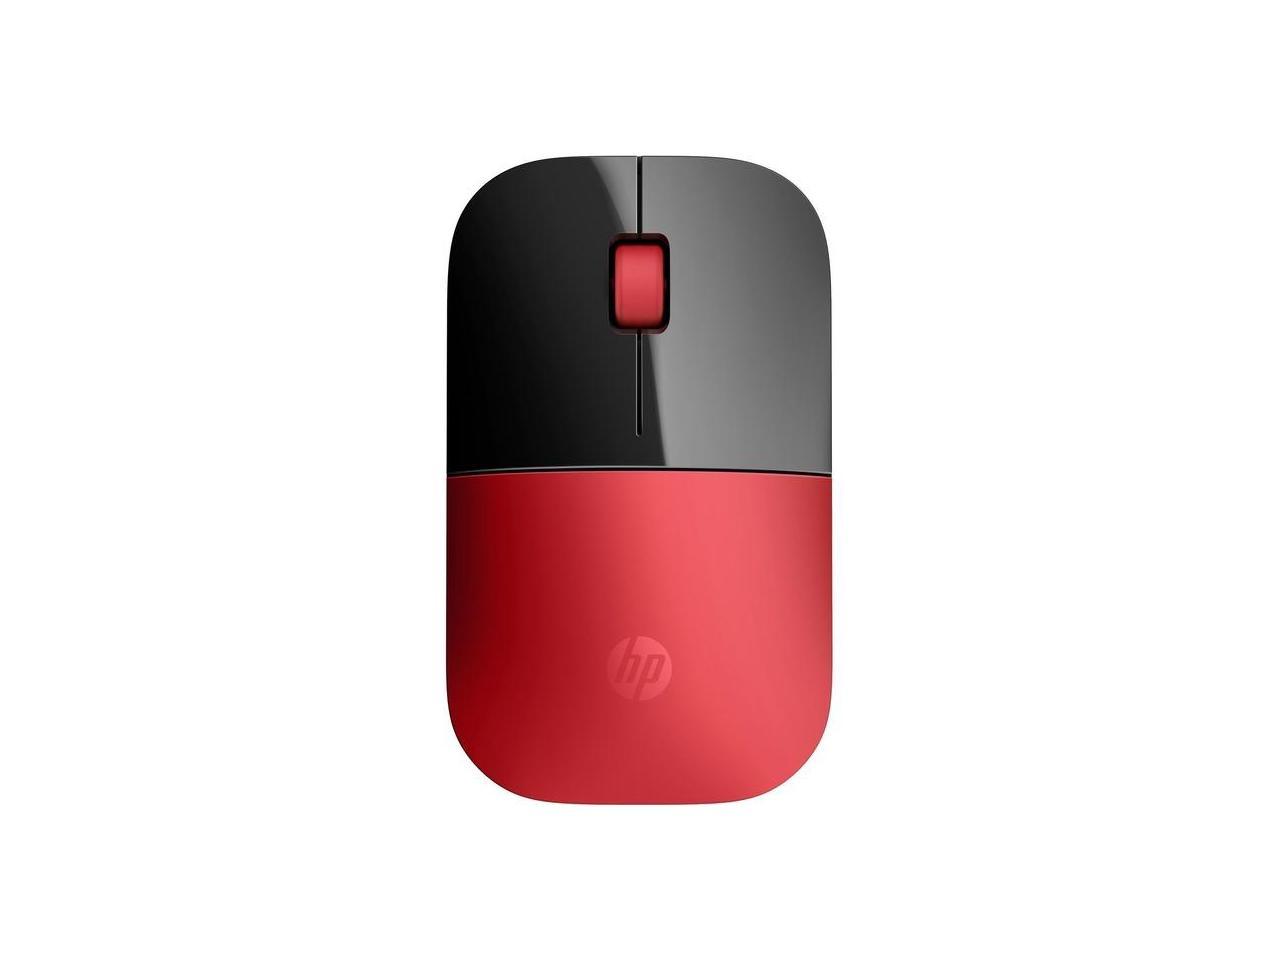 HP CONSUMER V0L82AA#ABL HP Z3700 Wireless Mouse Red